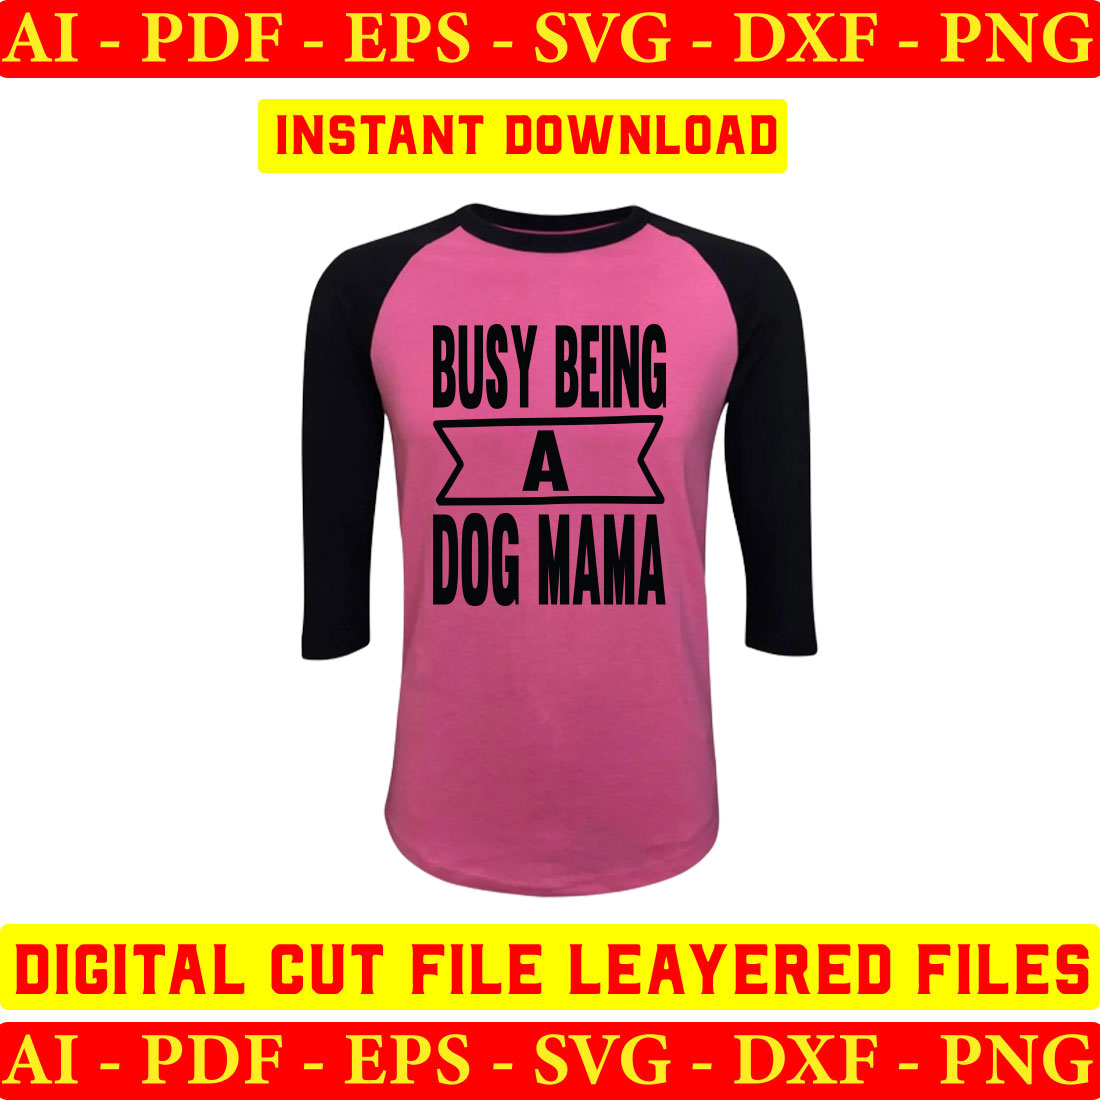 Pink and black shirt that says busy being a dog mama.